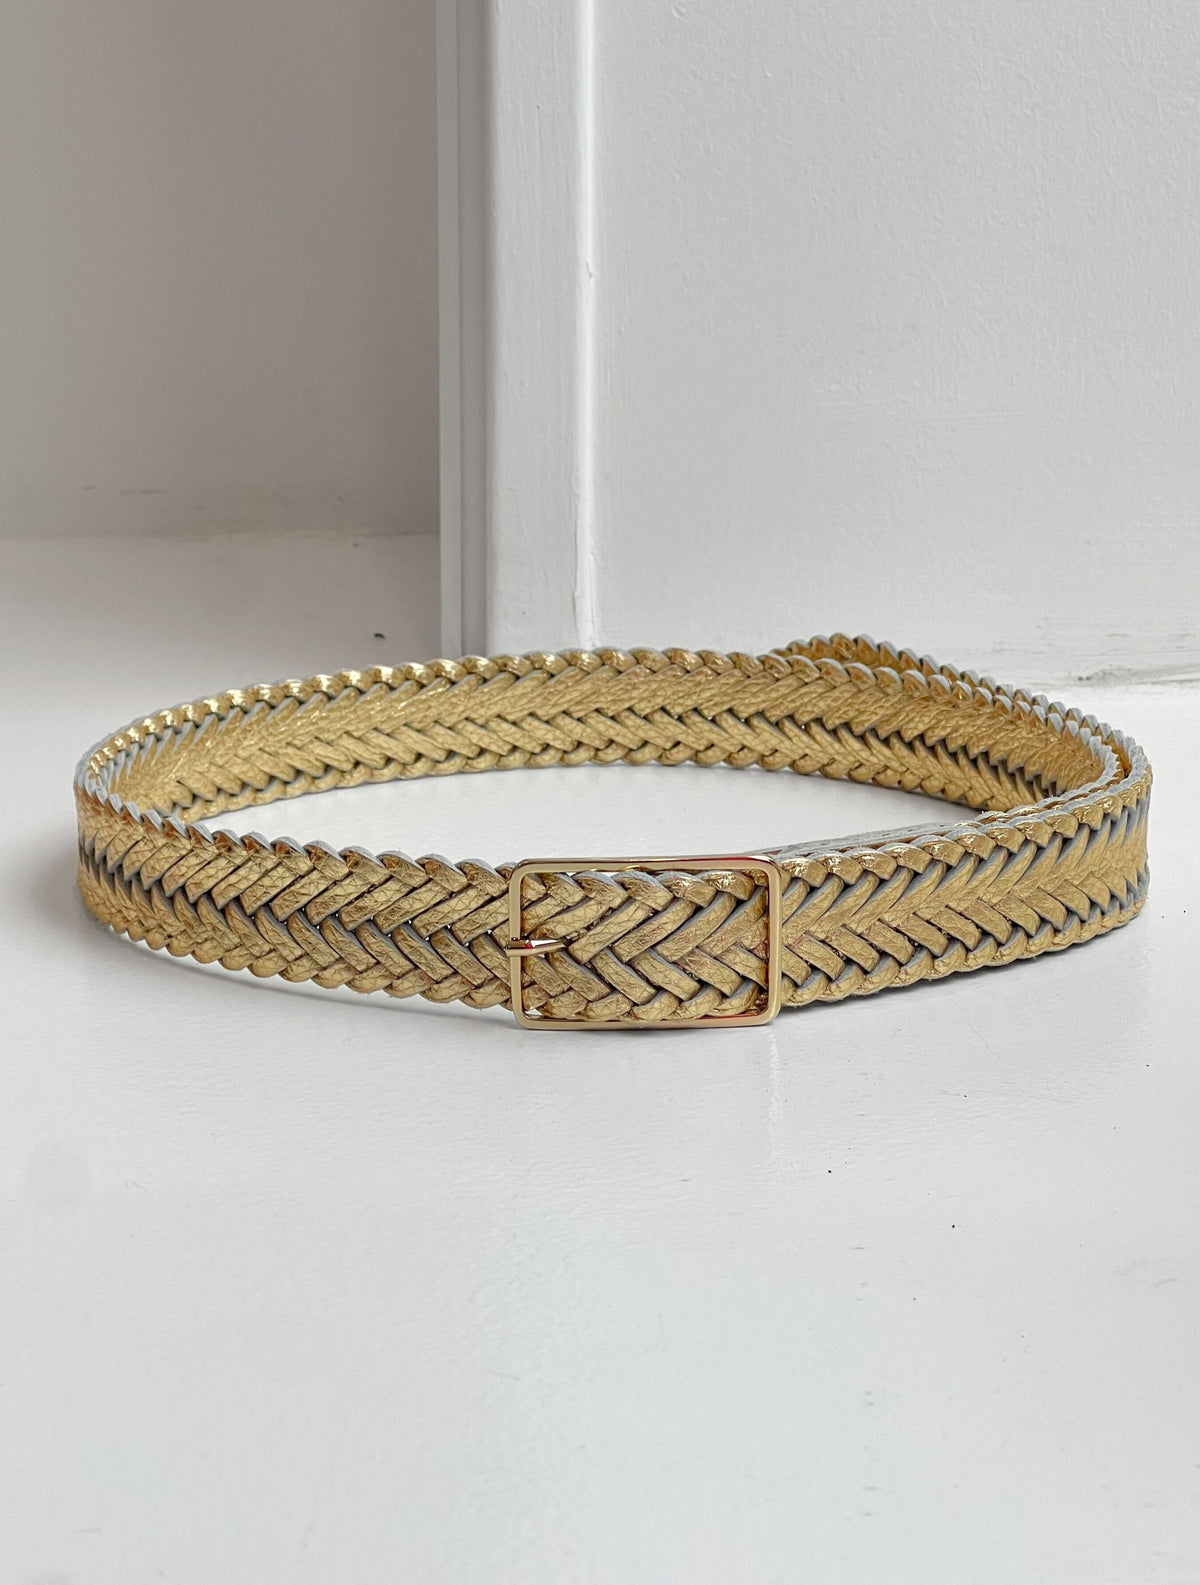 Plaited leather belt in gold with a square gold buckle